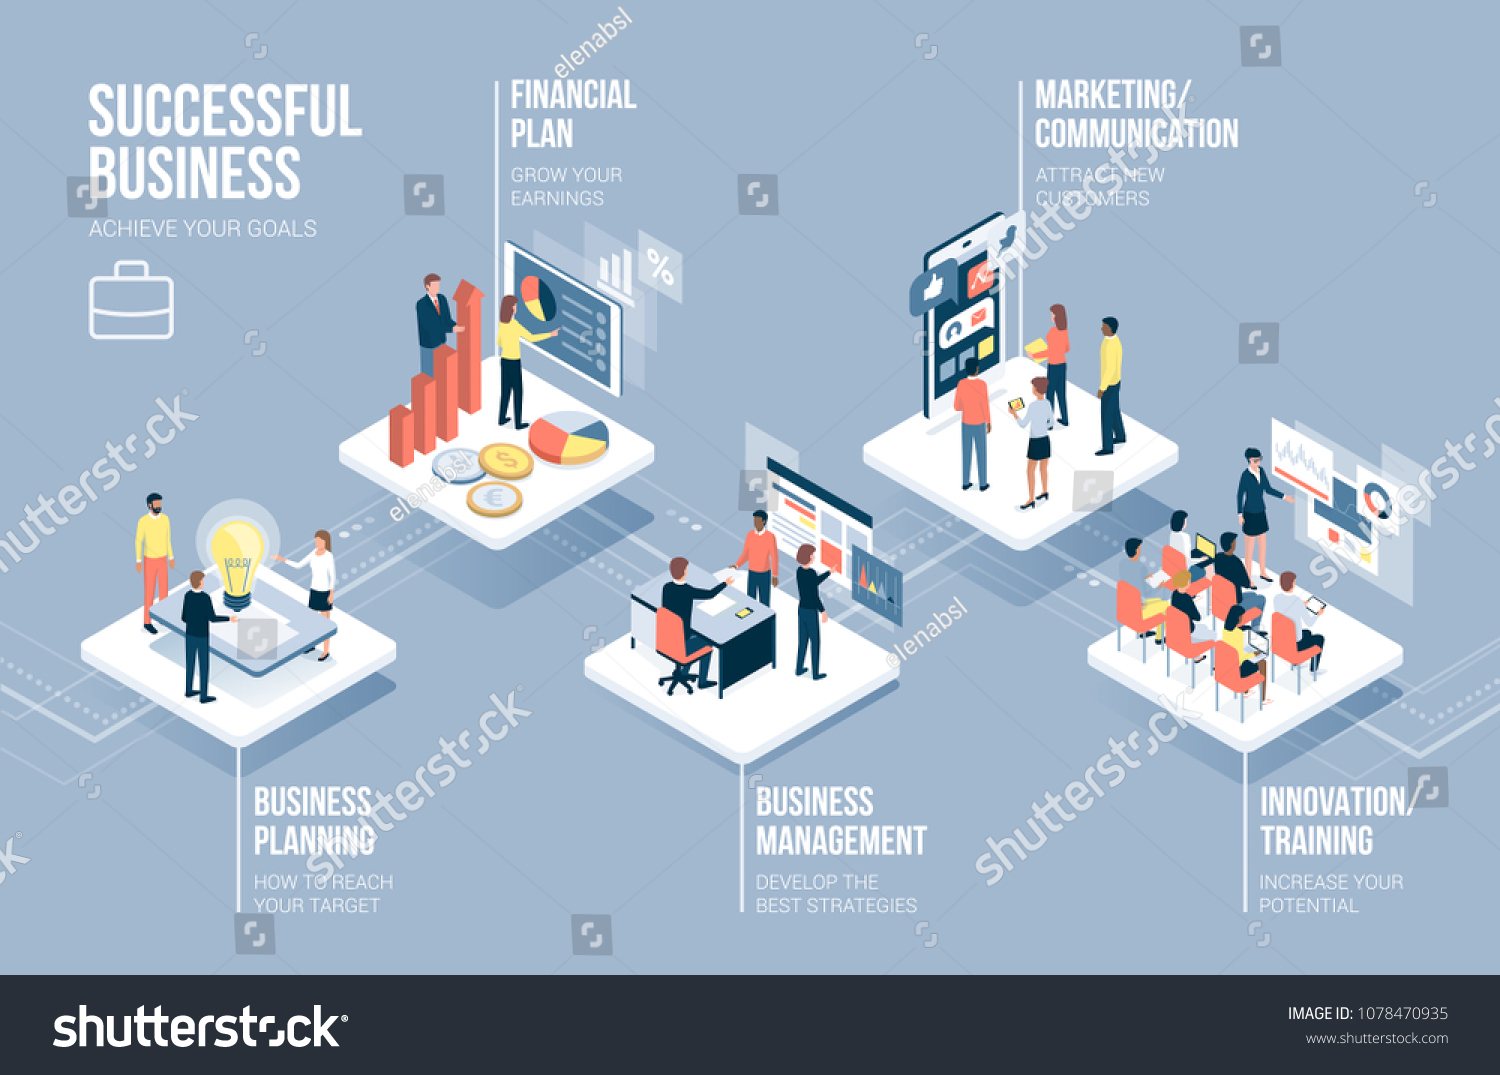 Business and technology infographic with corporate people working together on app buttons and business concepts #1078470935